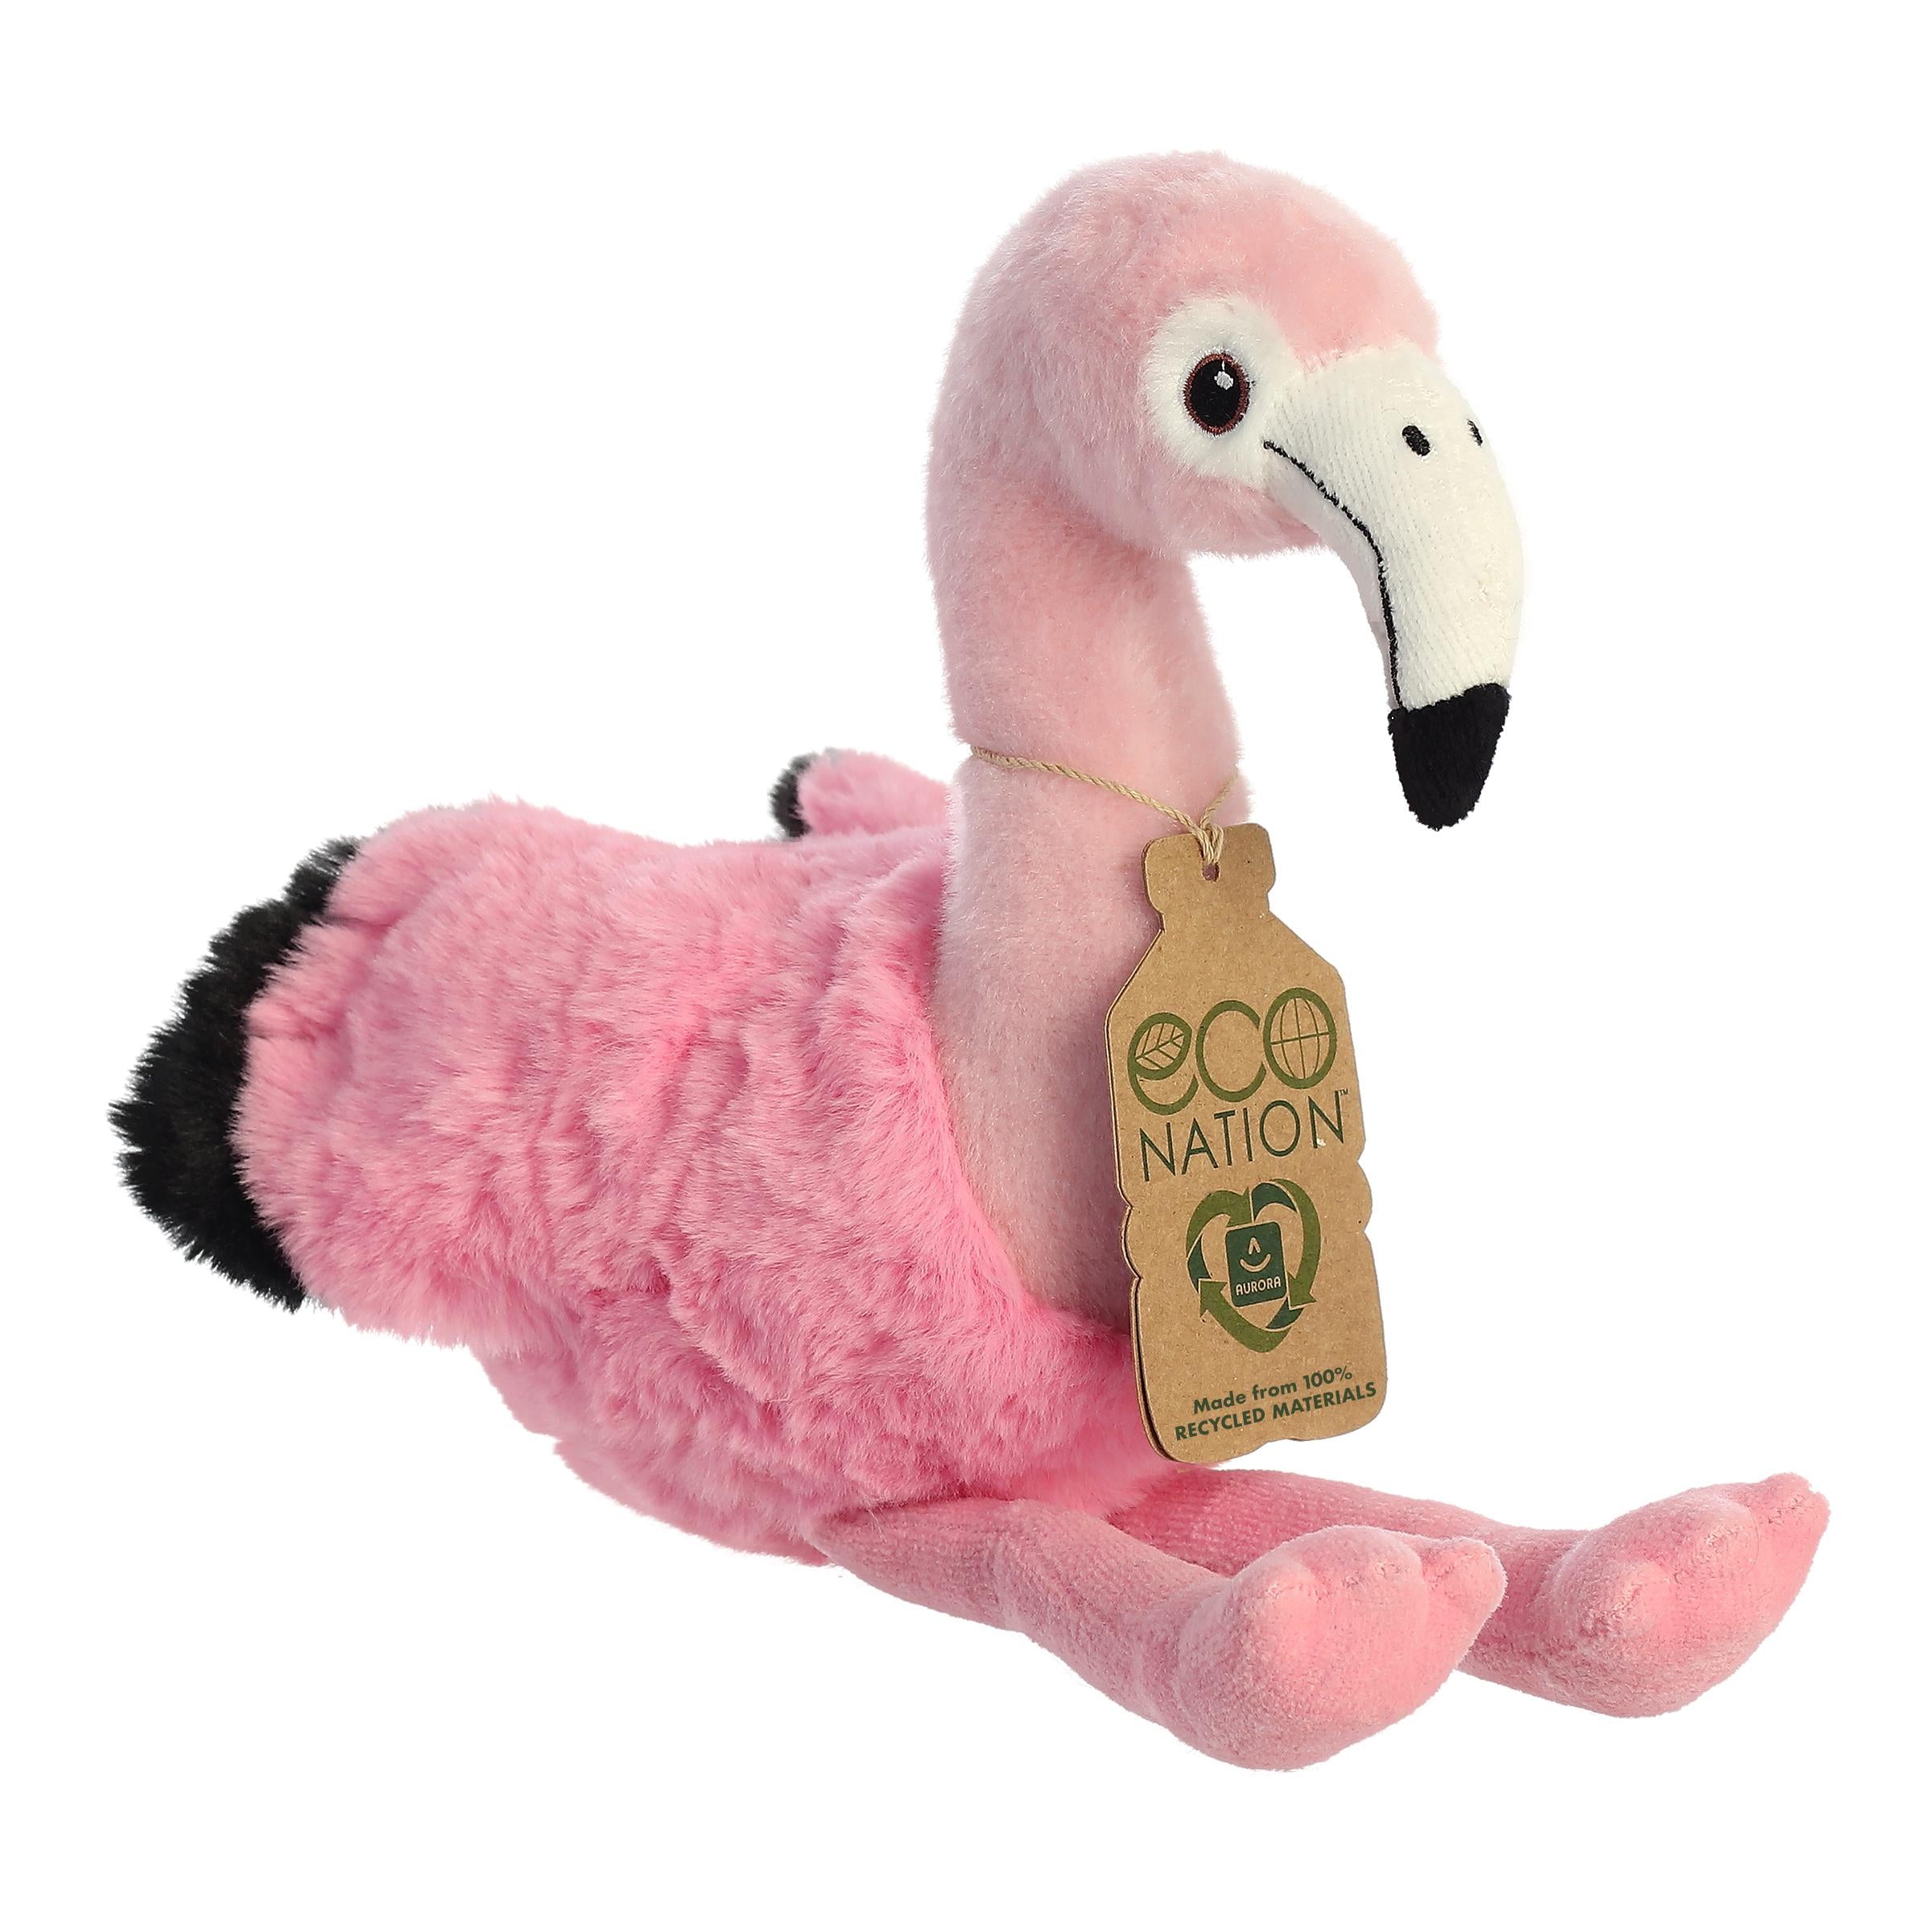 A vibrant flamingo plush with a bright pink coat, gentle embroidered eyes, and an eco-nation tag